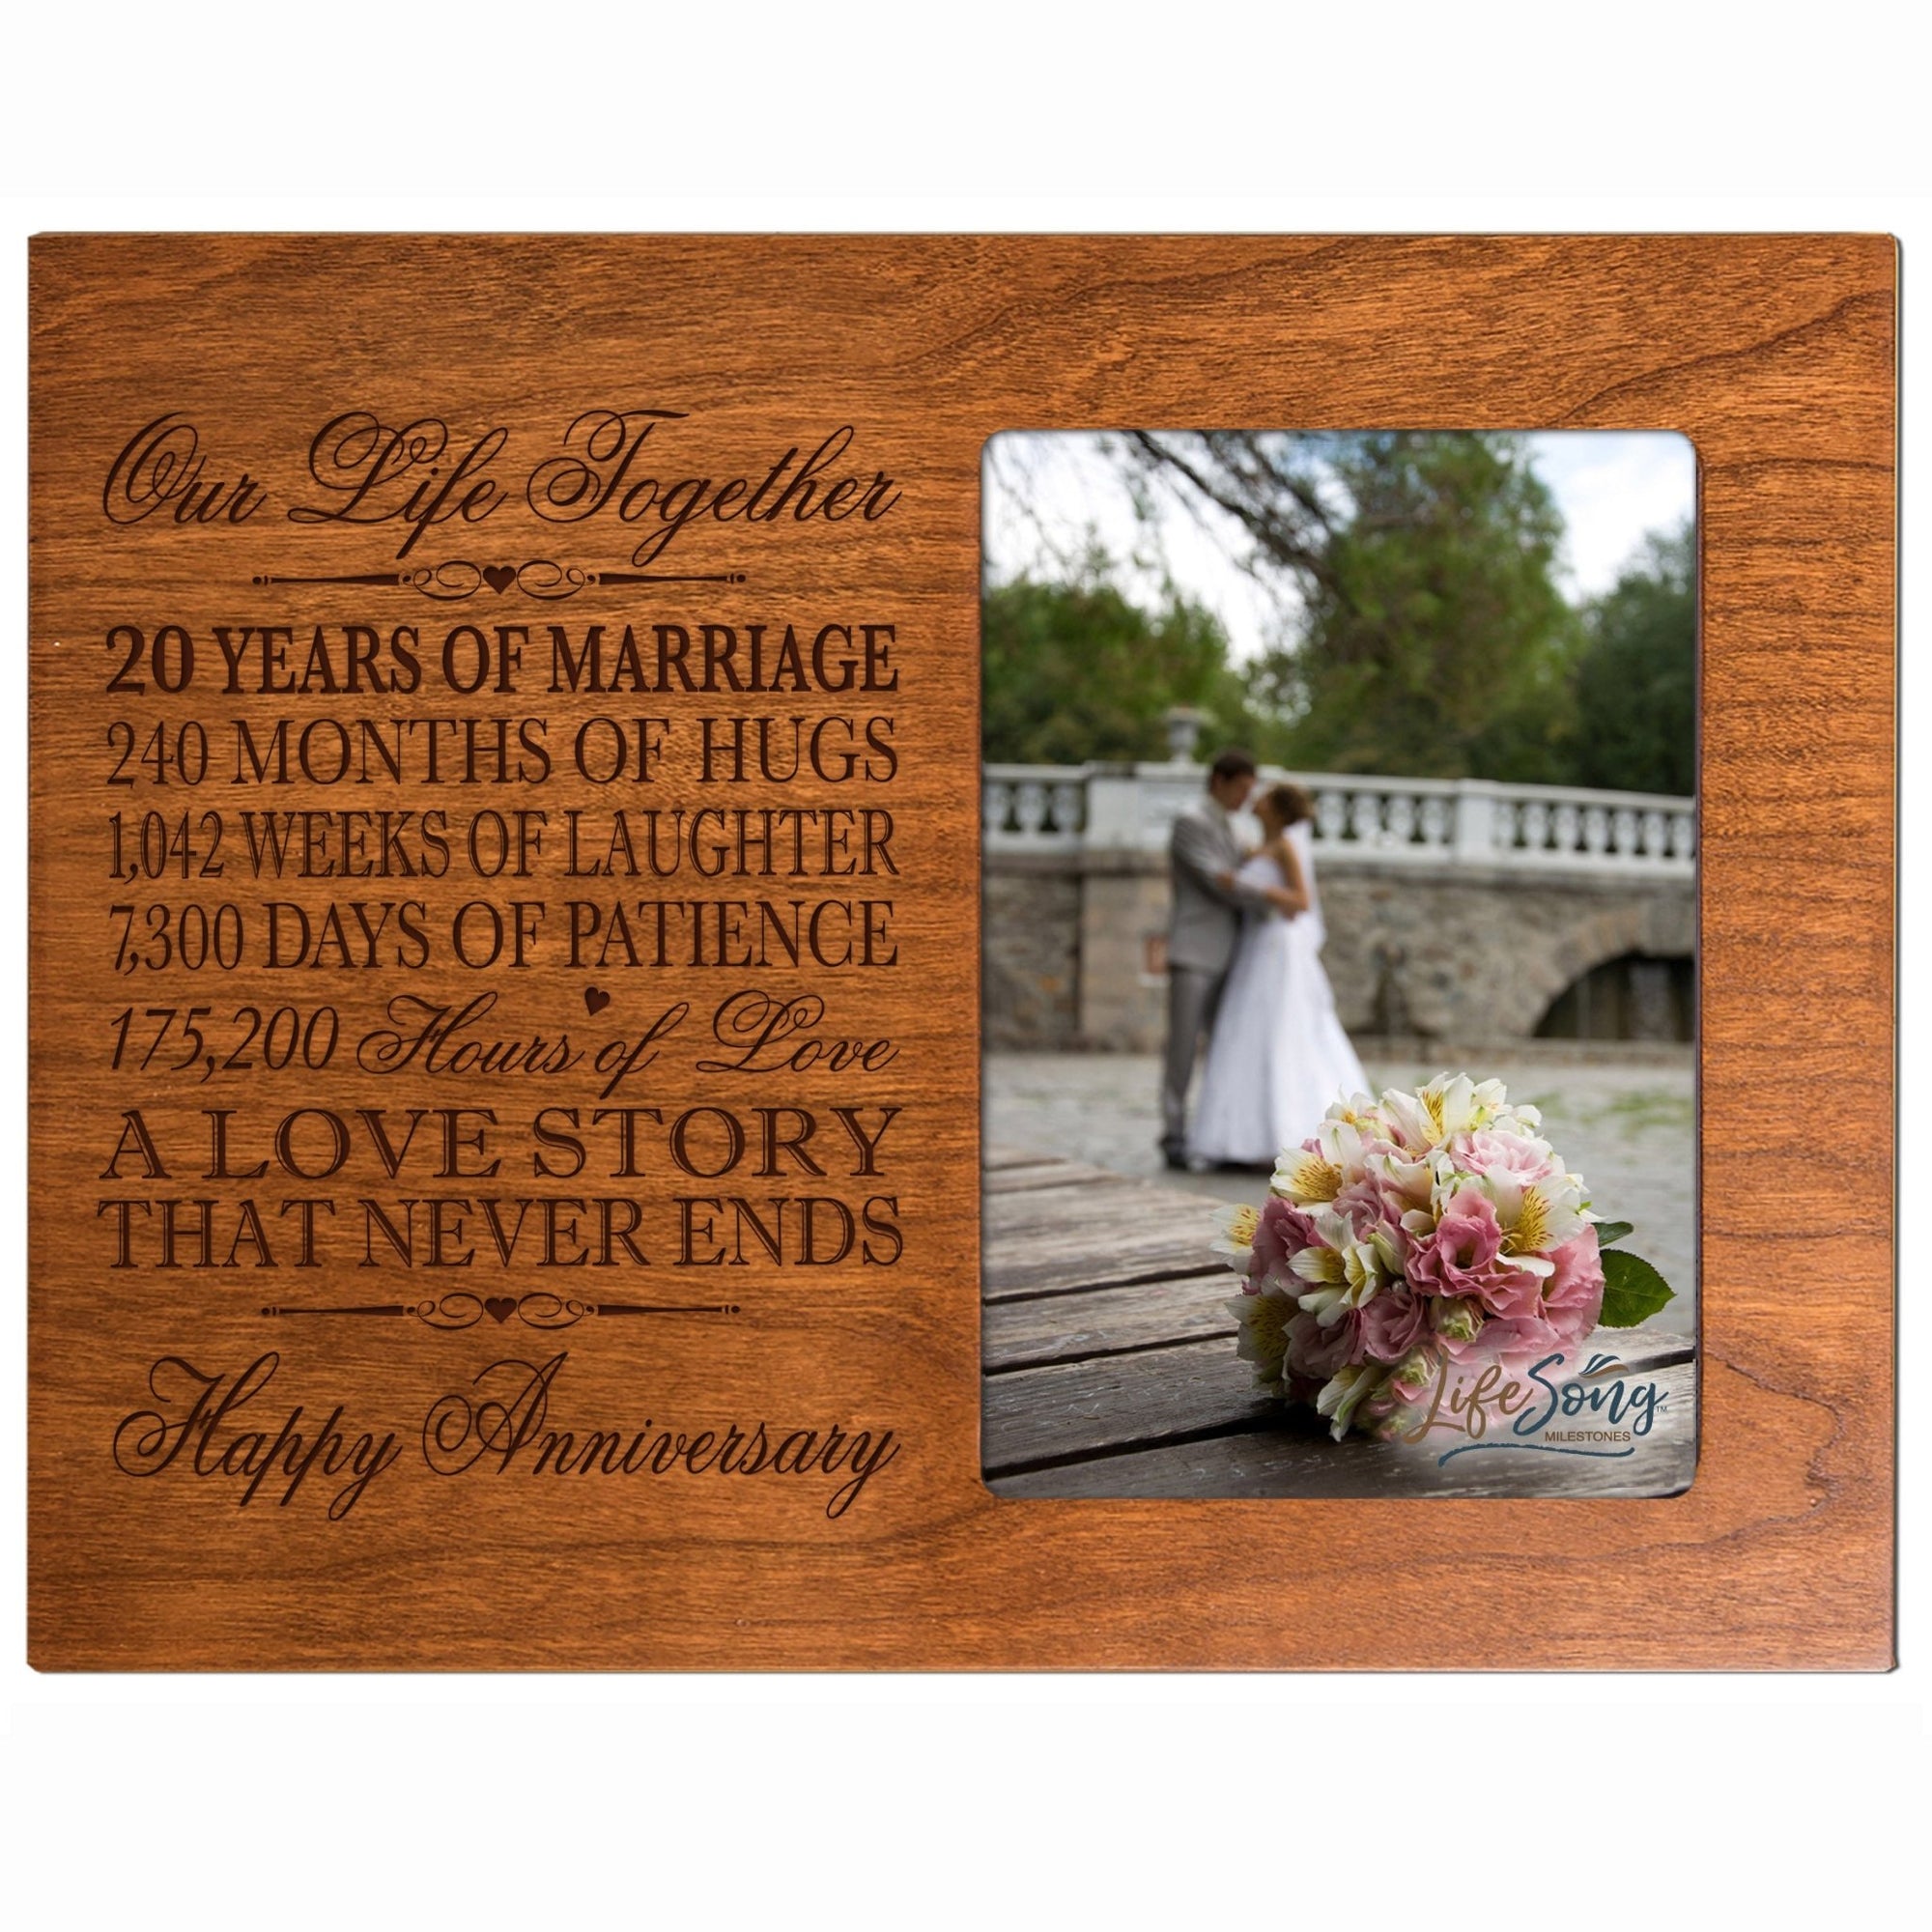 Unique Picture Frame 20th Wedding Anniversary Home Decor – Personalized Gift for Couples